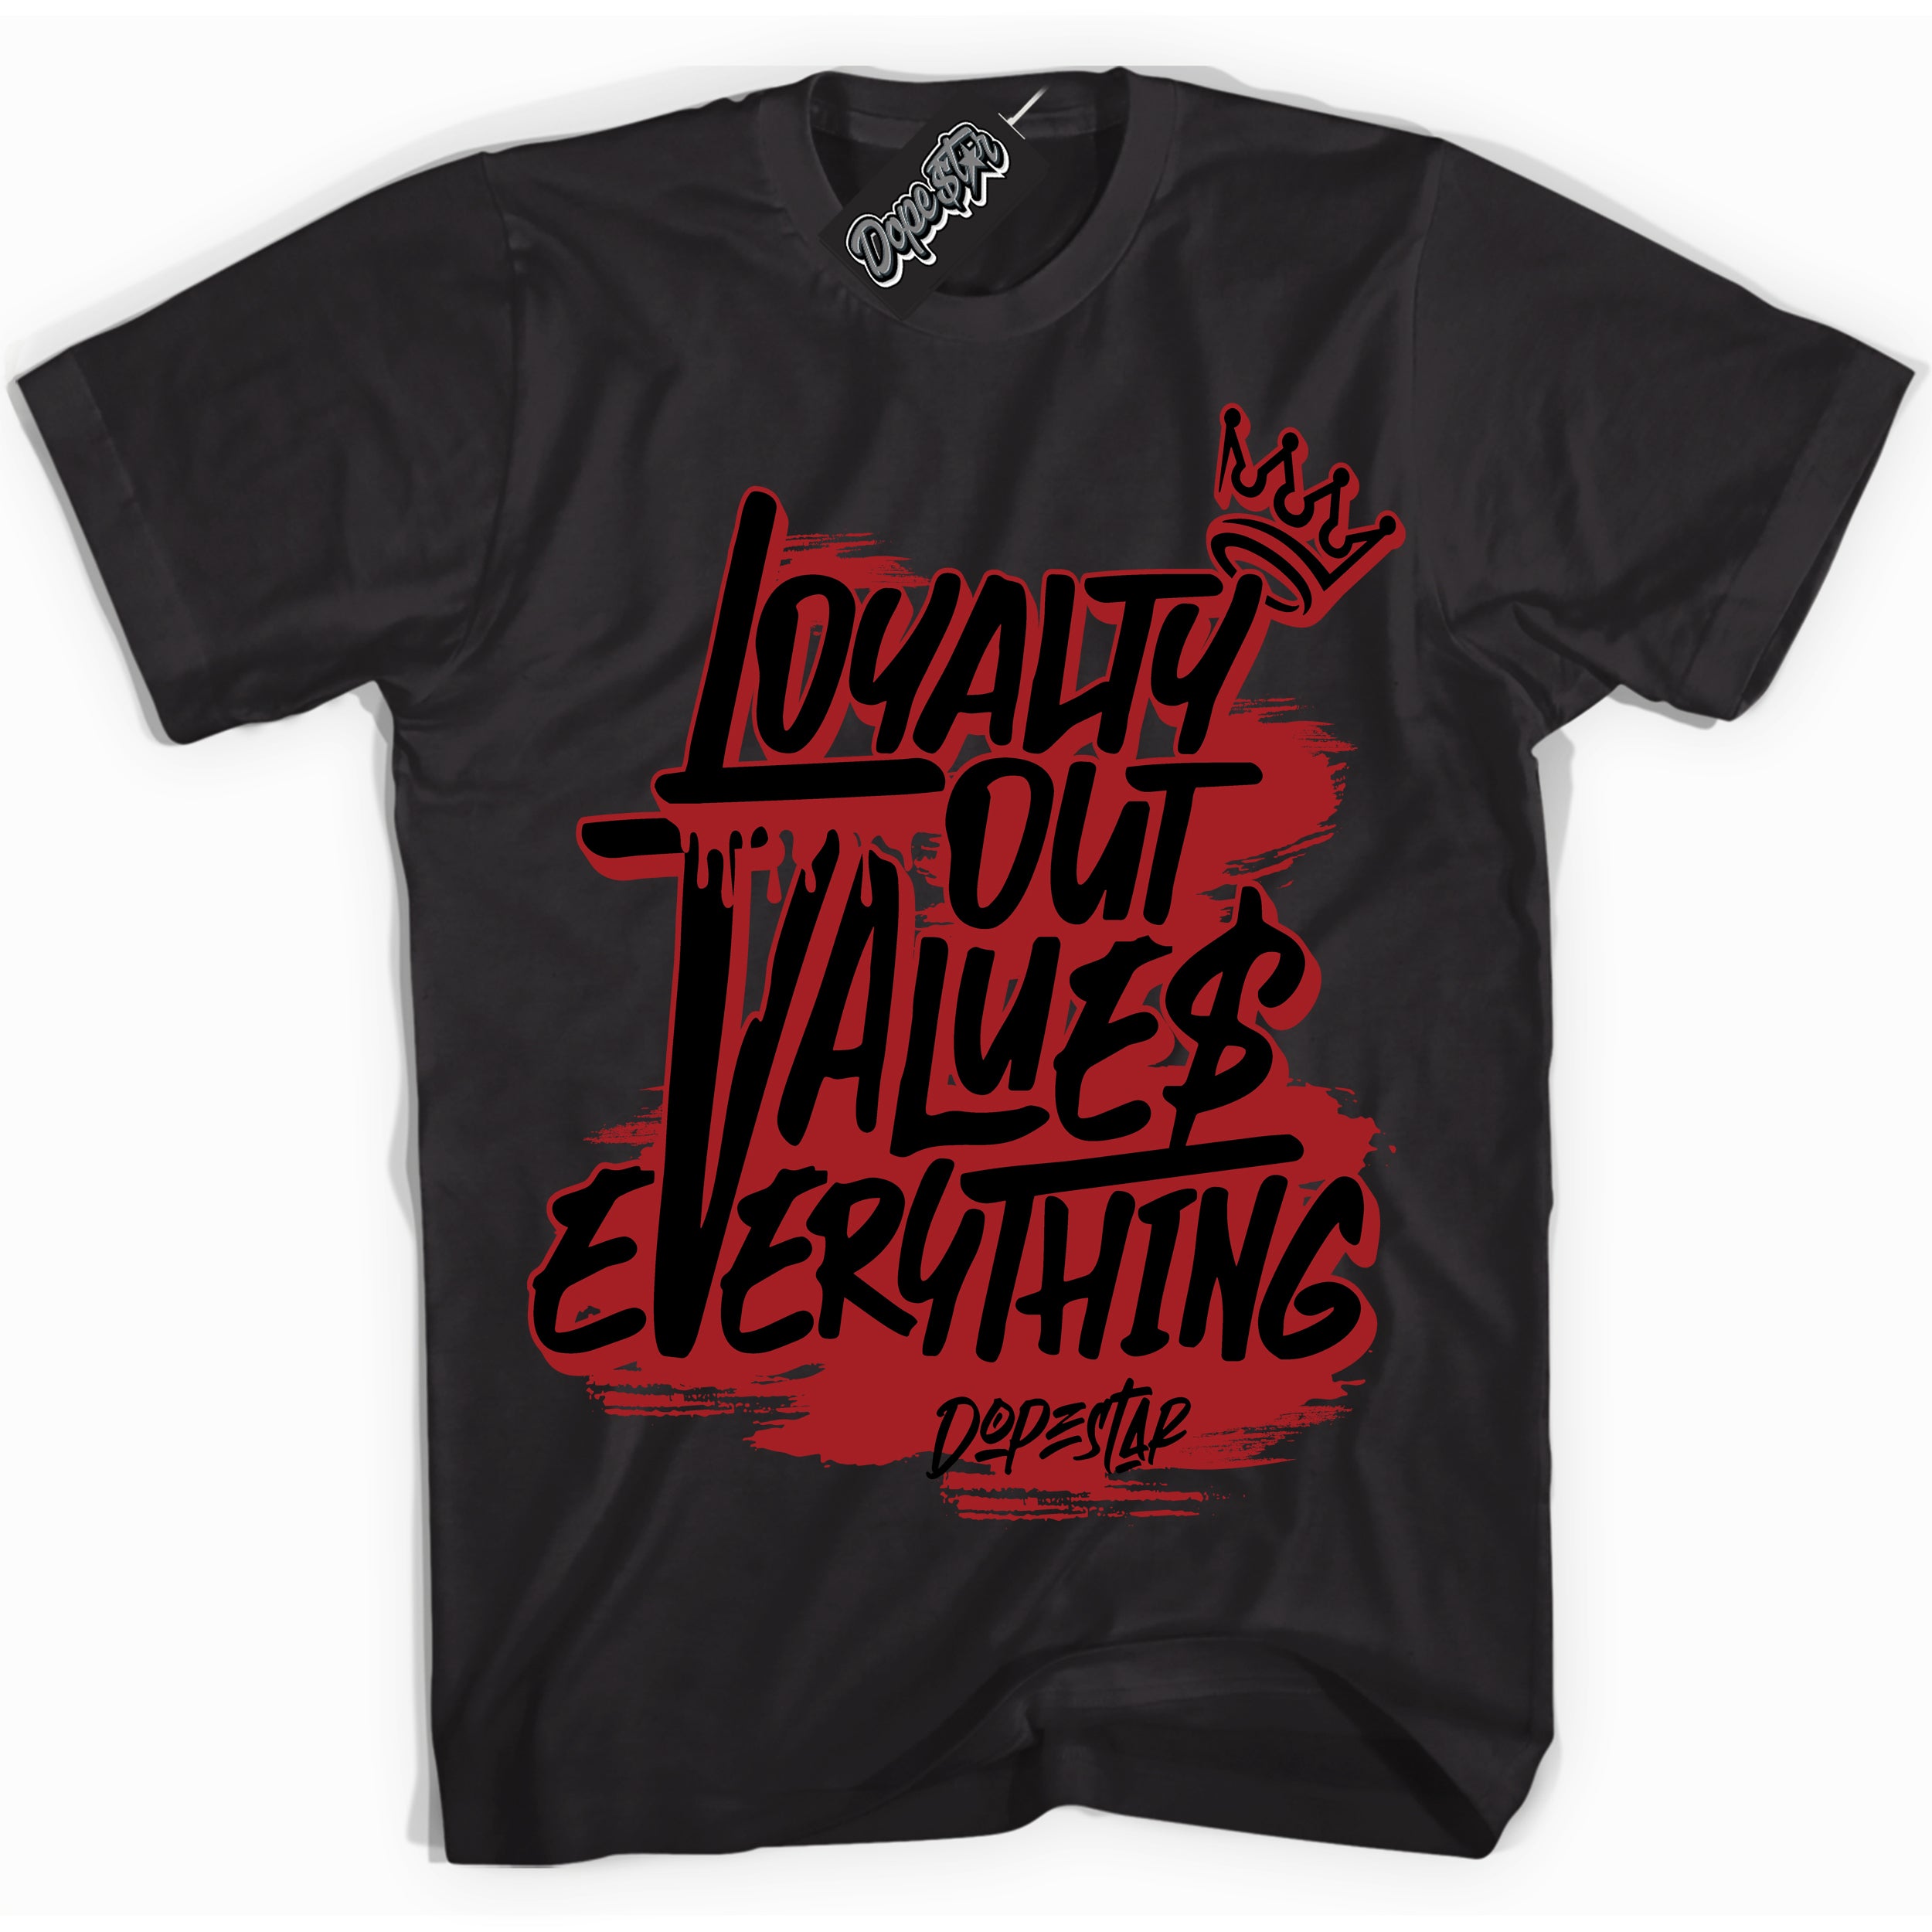 Cool Black Shirt with “ Loyalty Out Values Everything” design that perfectly matches Lebron 20 Liverpool Sneakers.